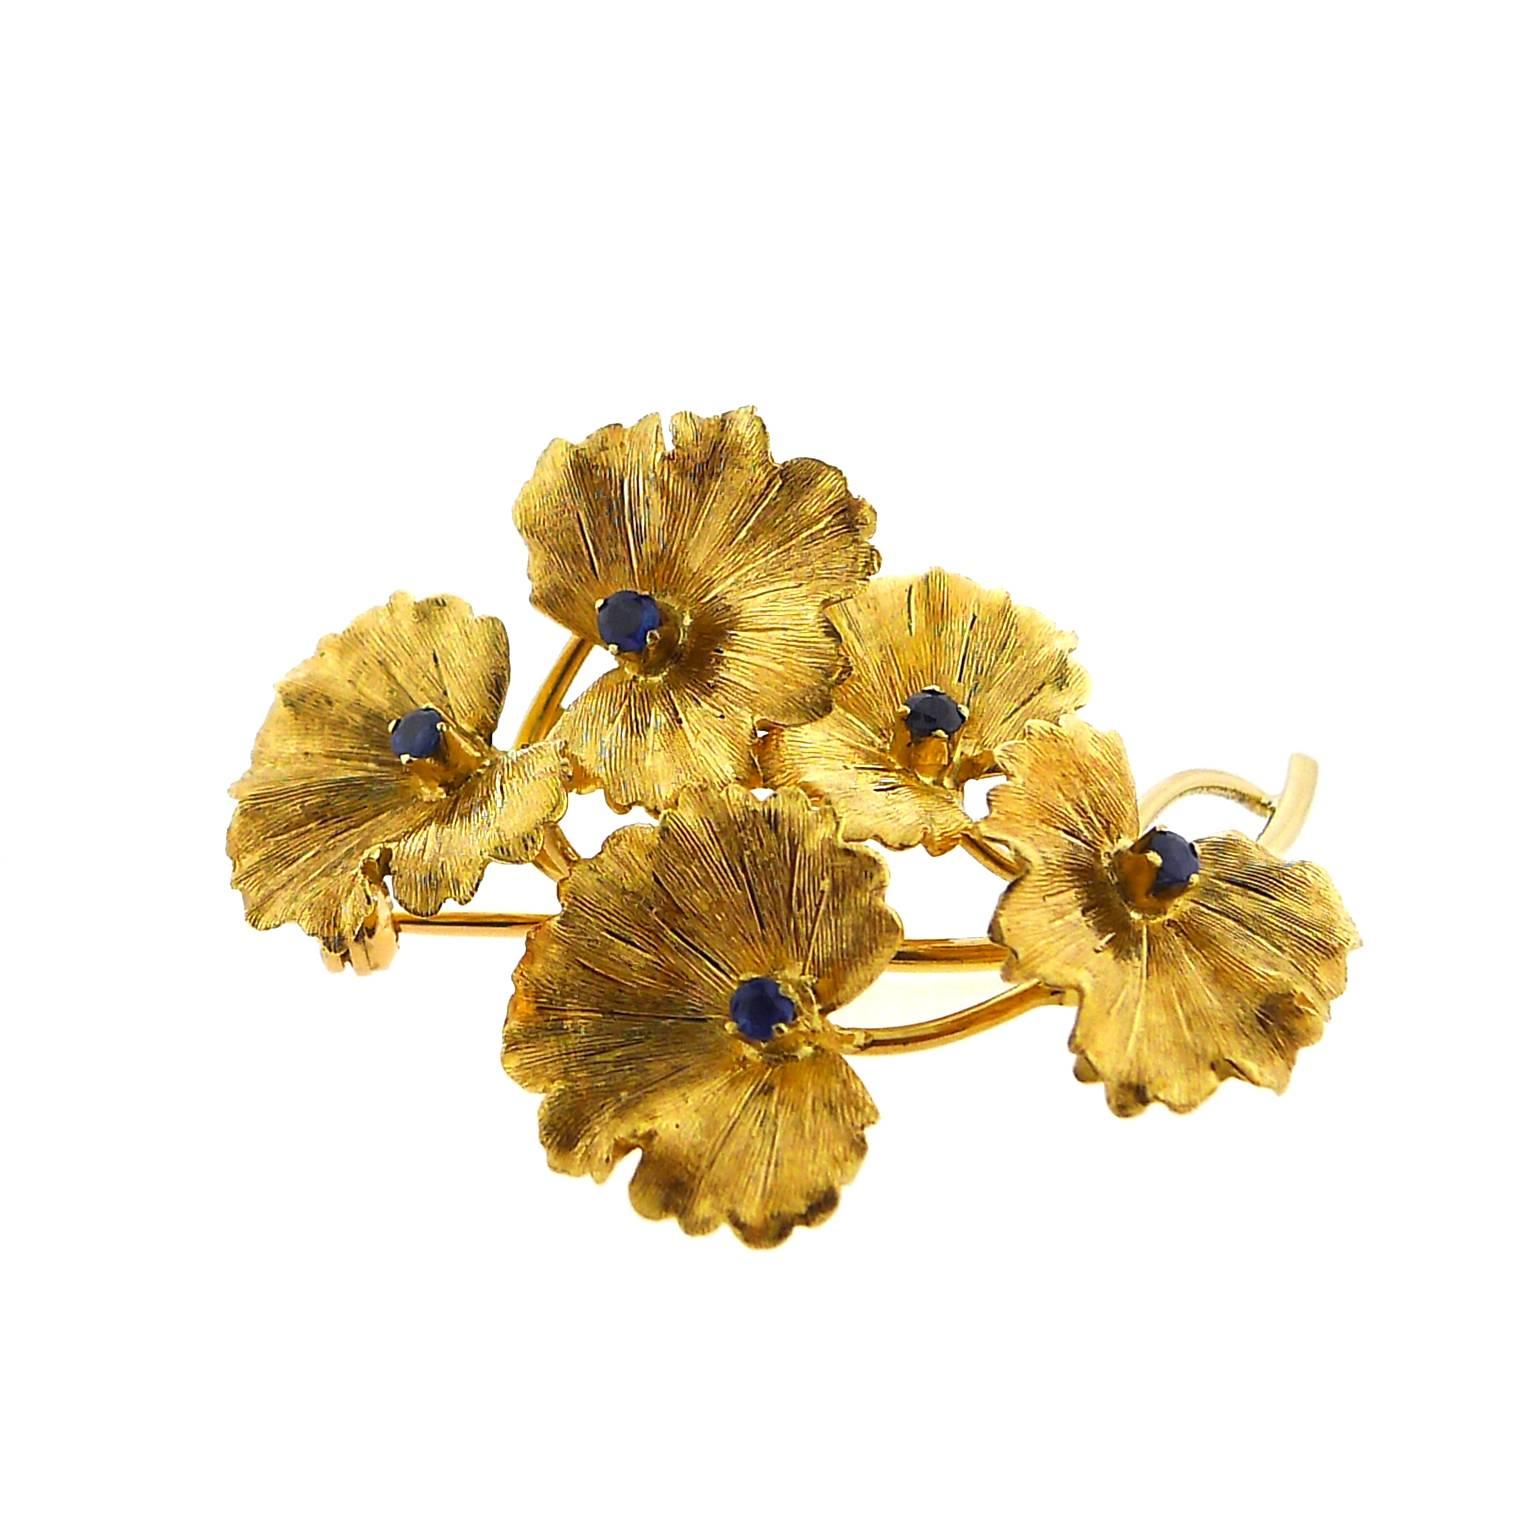 18 karat yellow gold Tiffany flower pin with five small round sapphires measures 2 inches by 1.25 inches and weights 9.5 grams.  